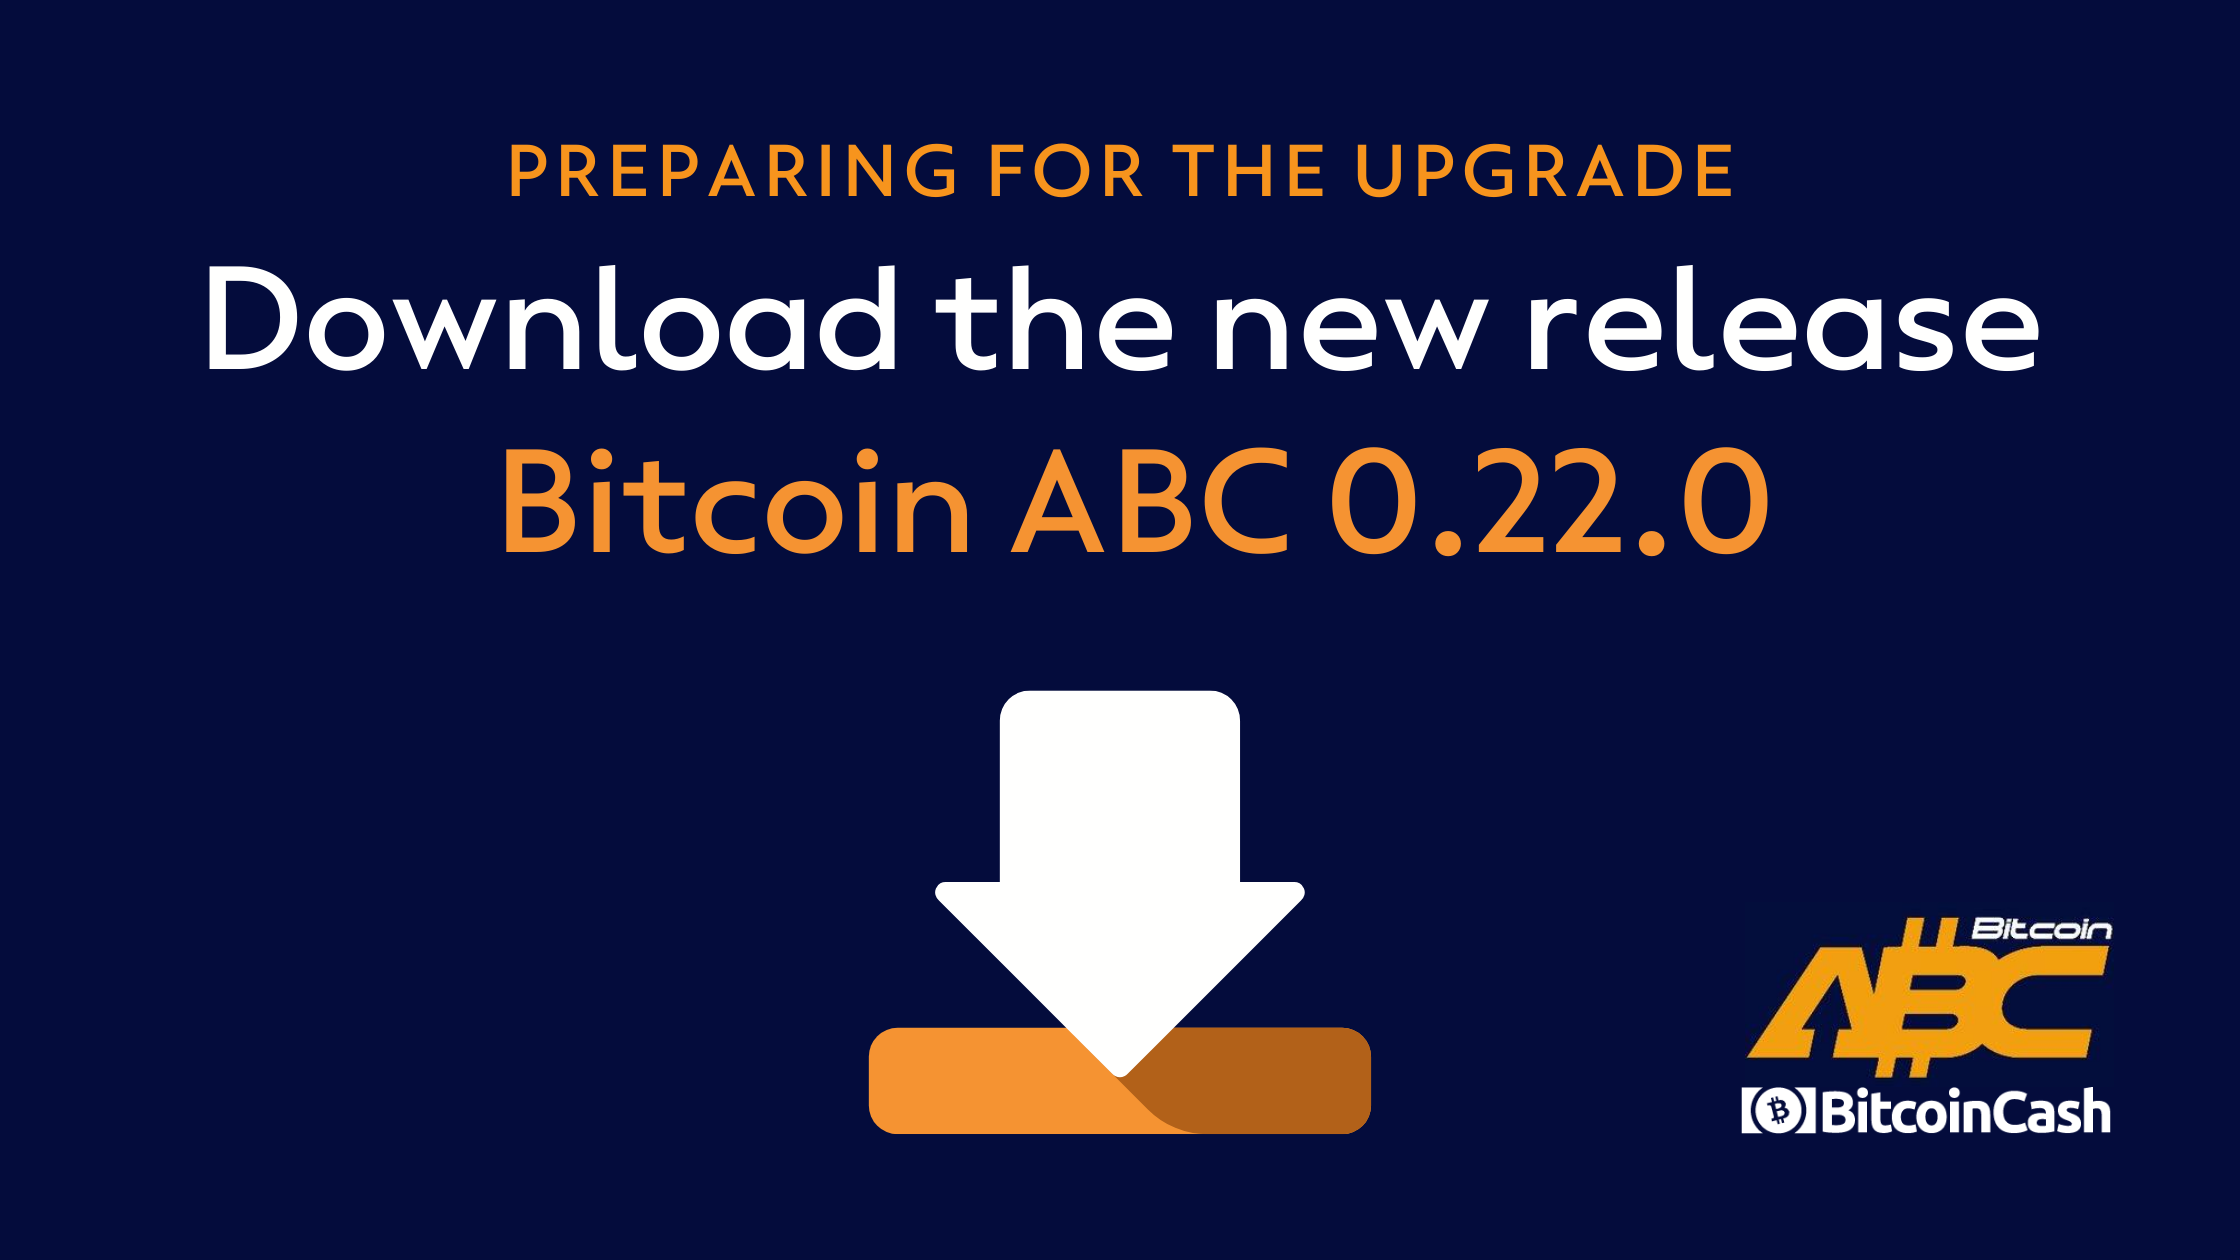 Preparing for the Upgrade: Download the new Bitcoin ABC 0.22.0